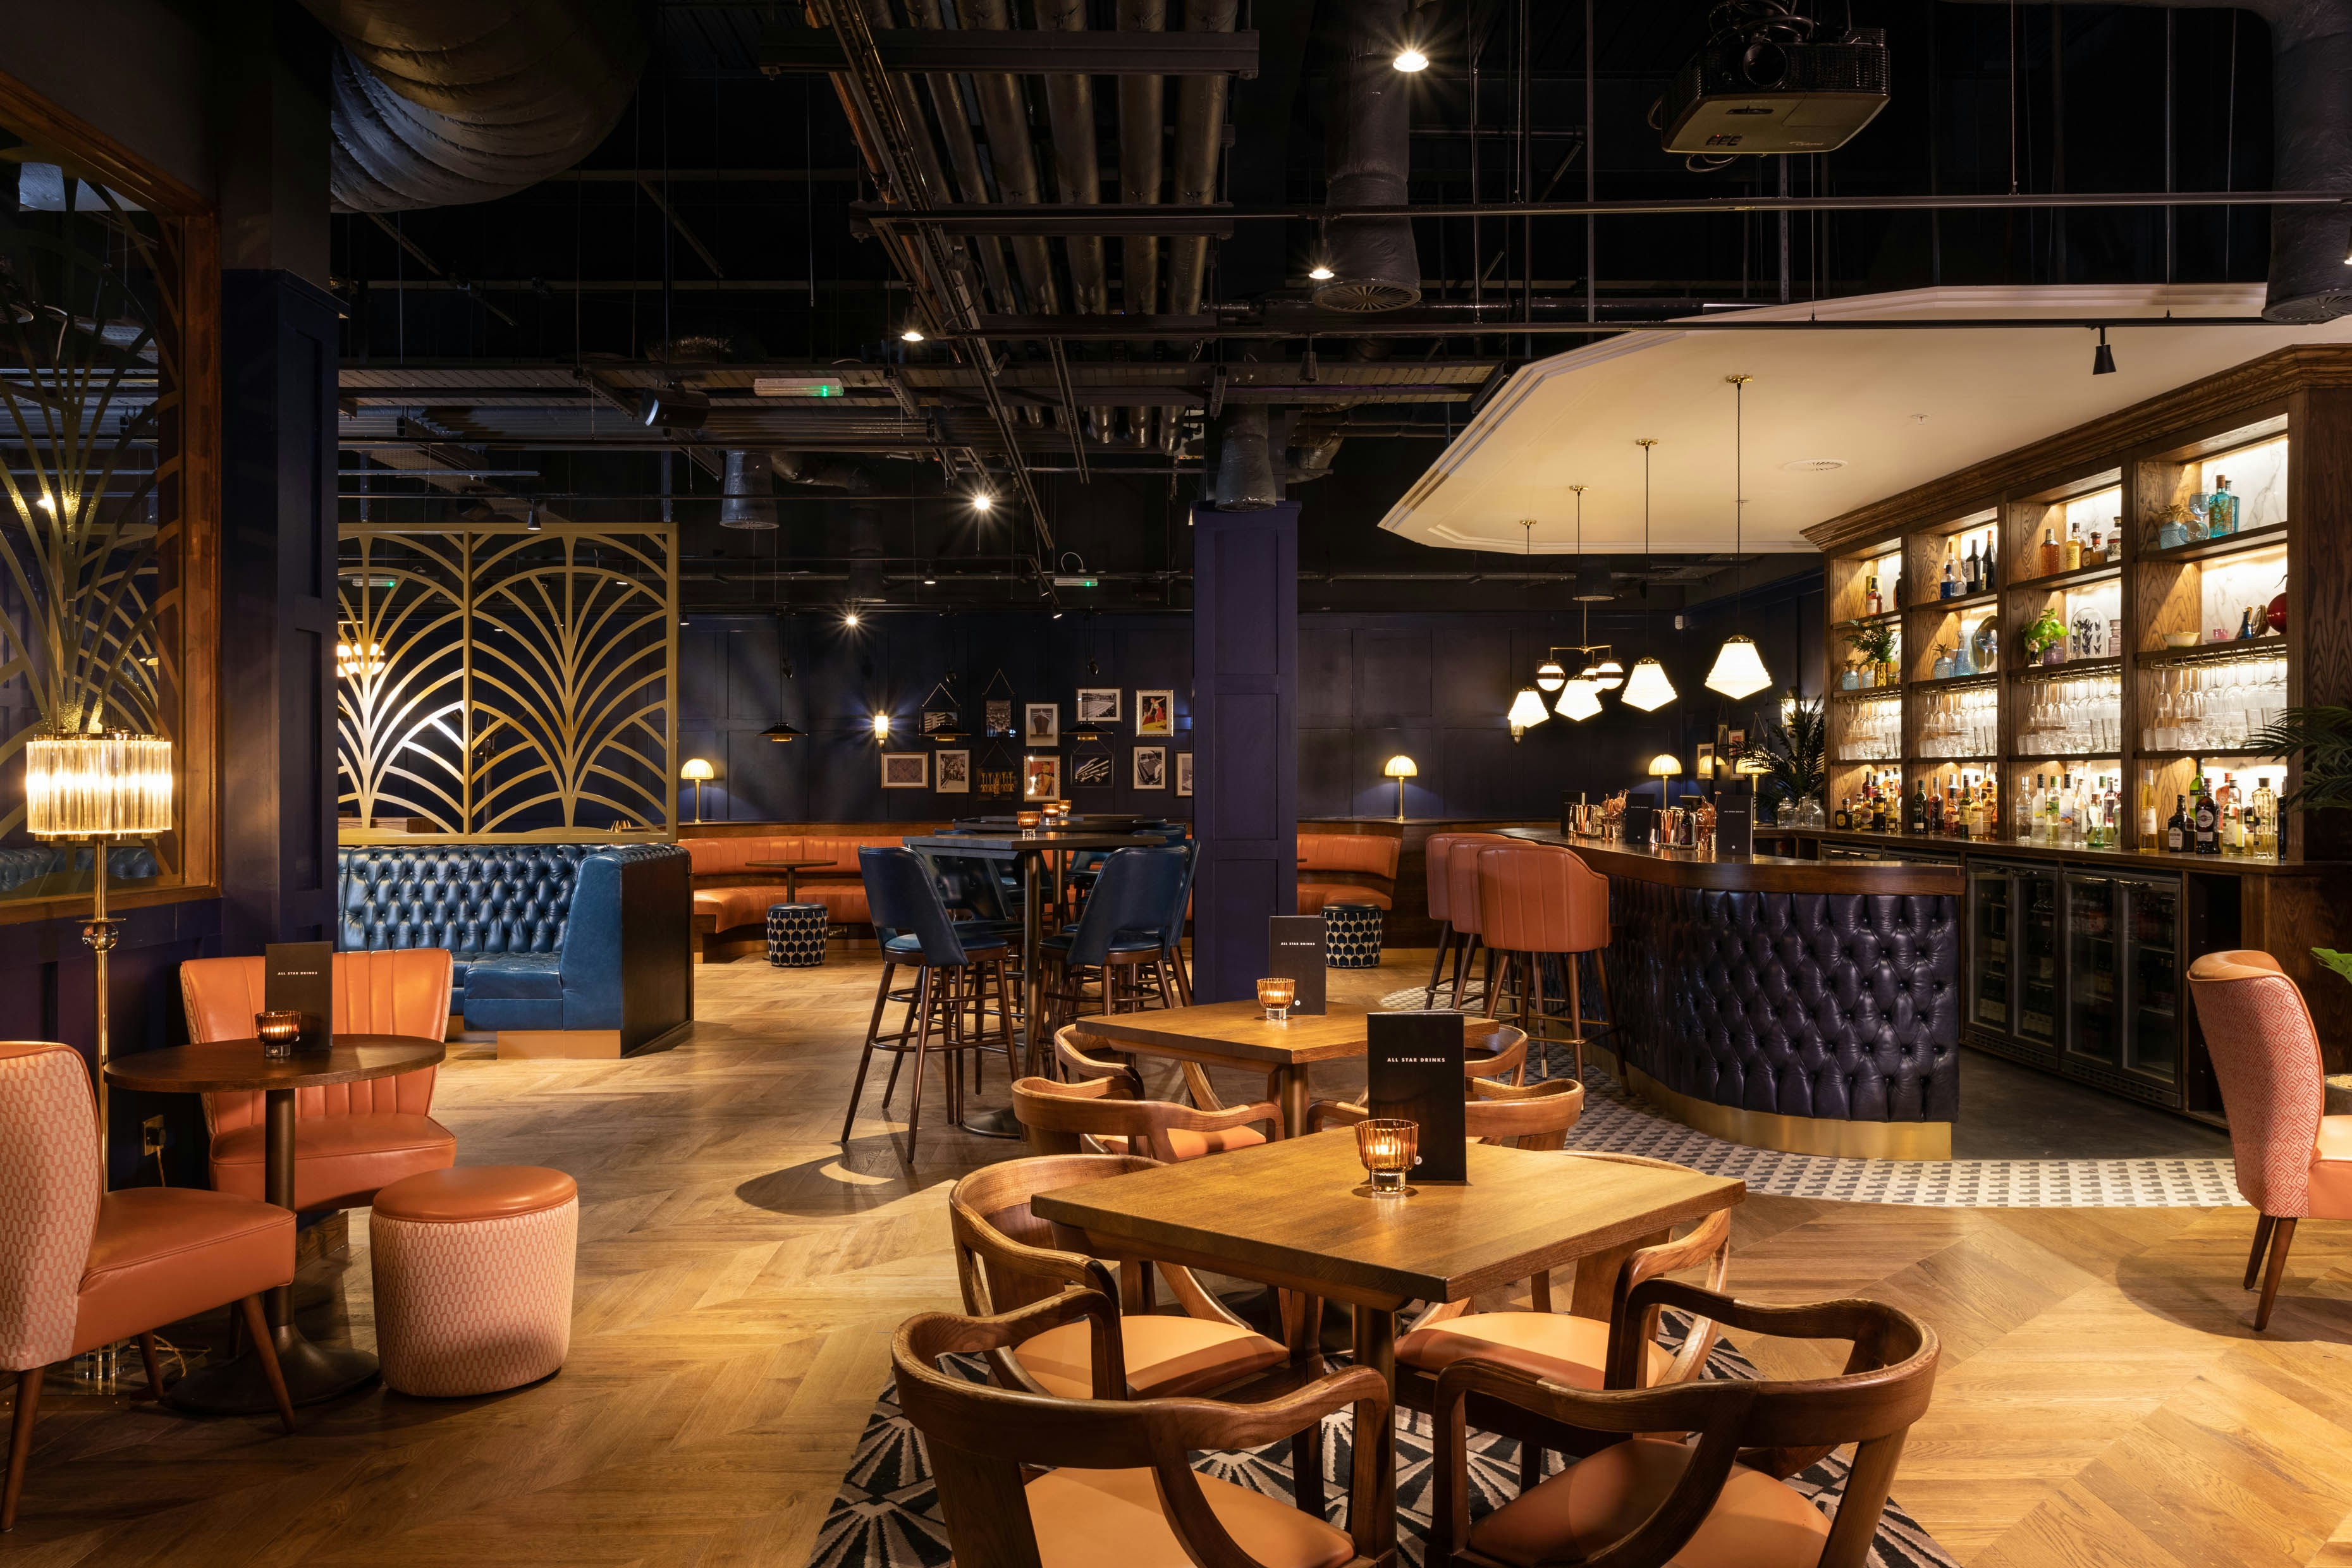 Team Building Events Venues in London - All Star Lanes - White City